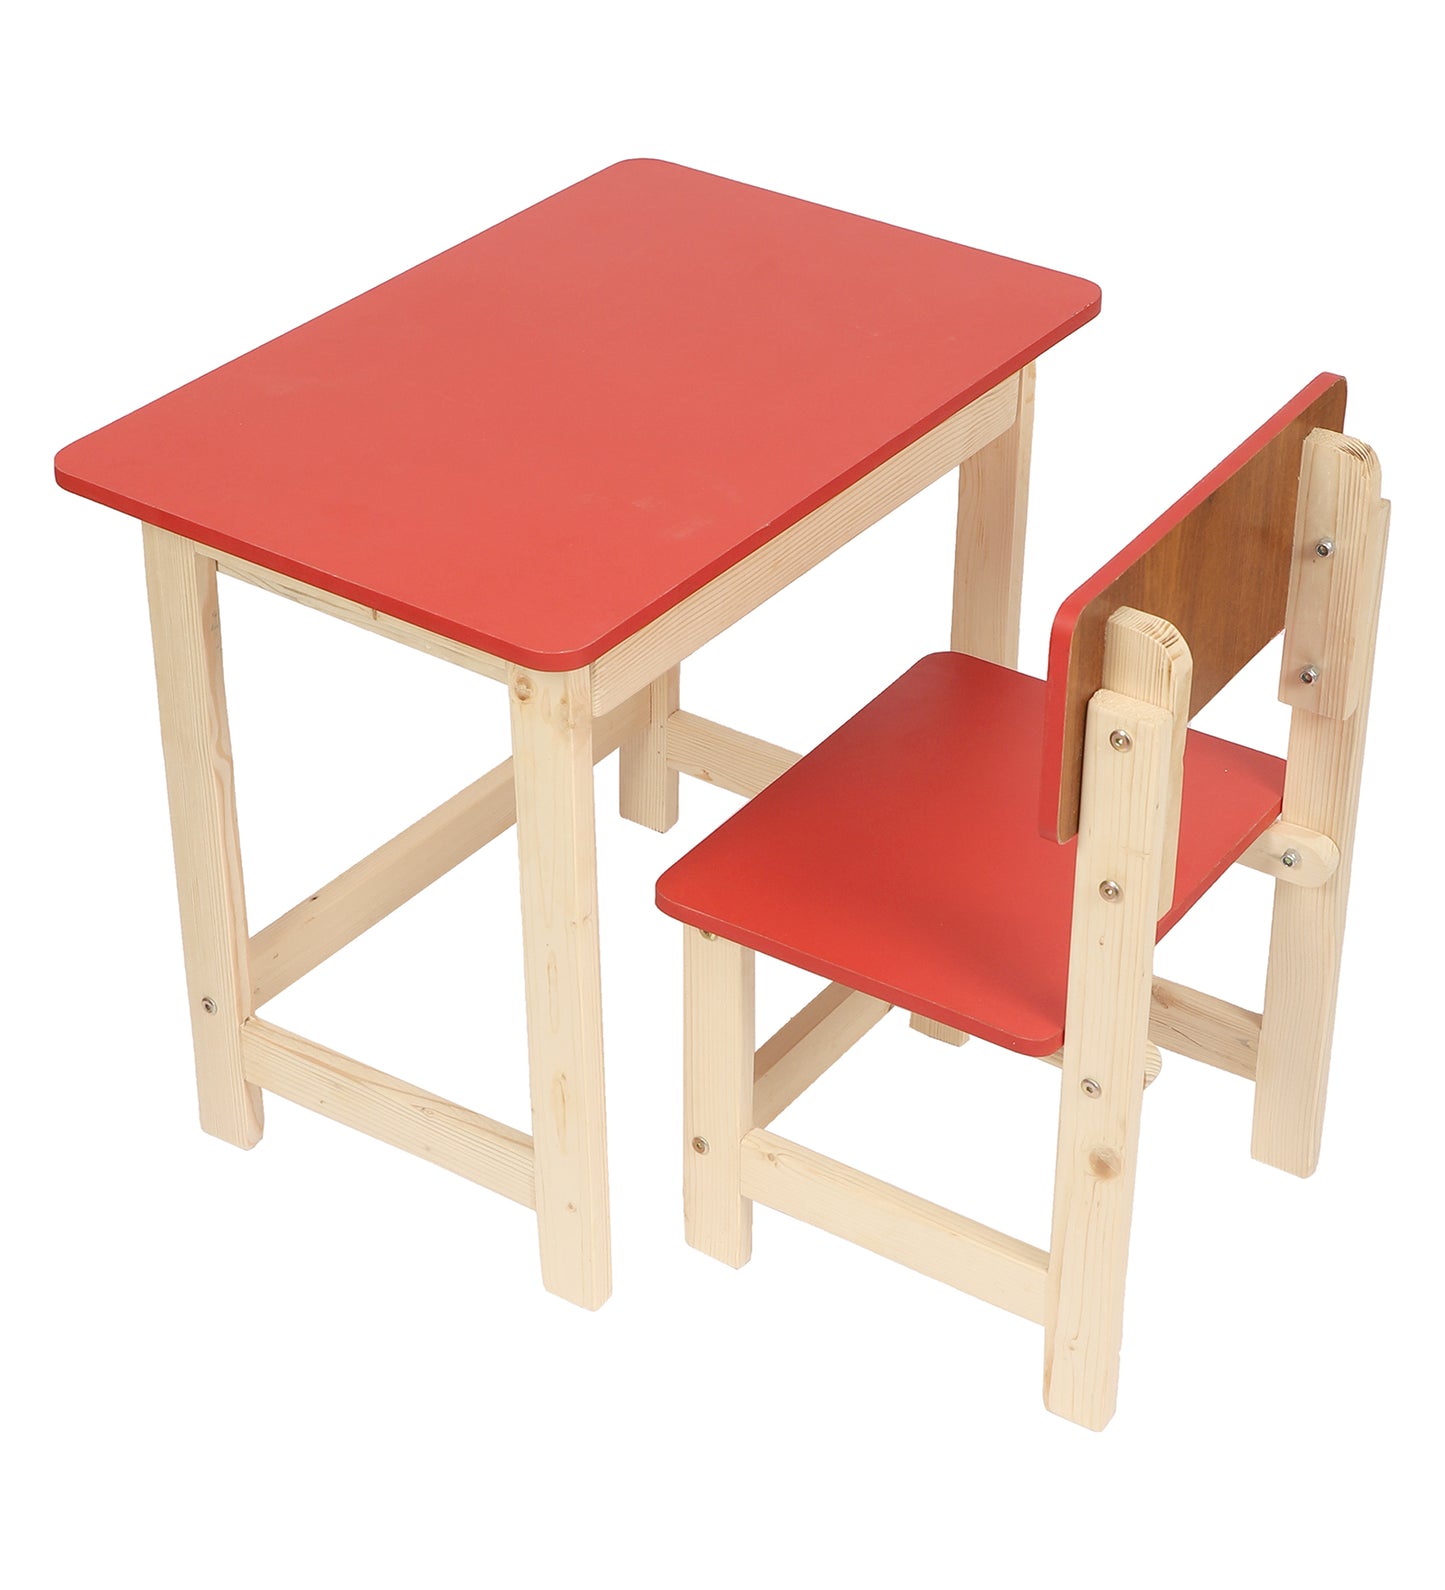 Wooden Table Chair Set Red (3-6 yrs)